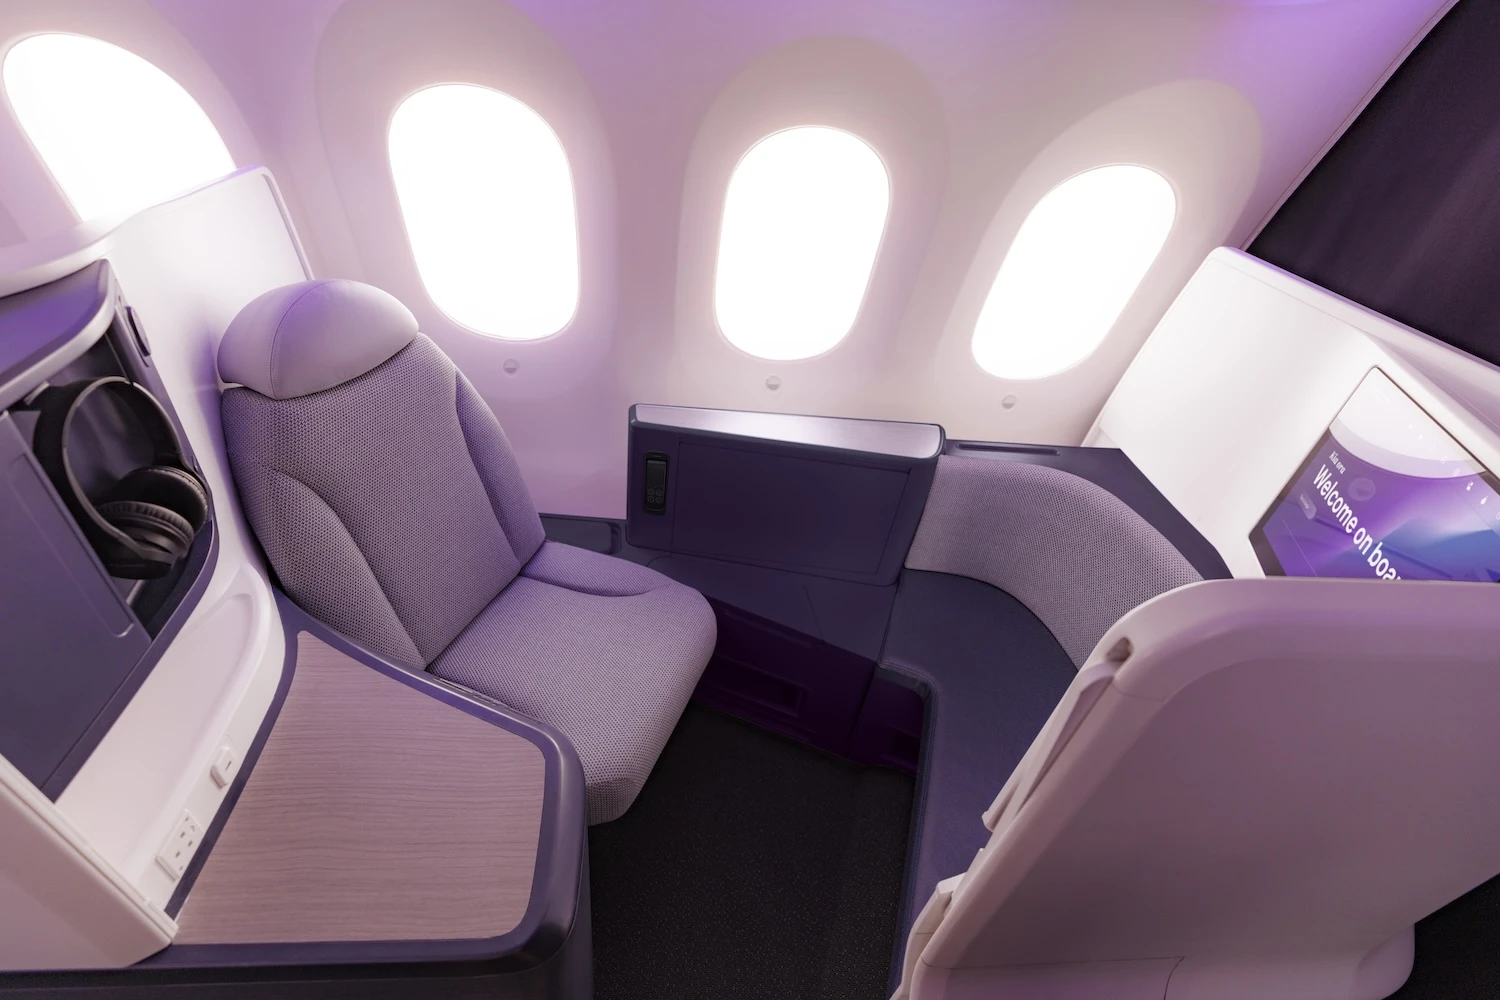 Air New Zealand will launch their new Premier Business Class cabin in 2024.